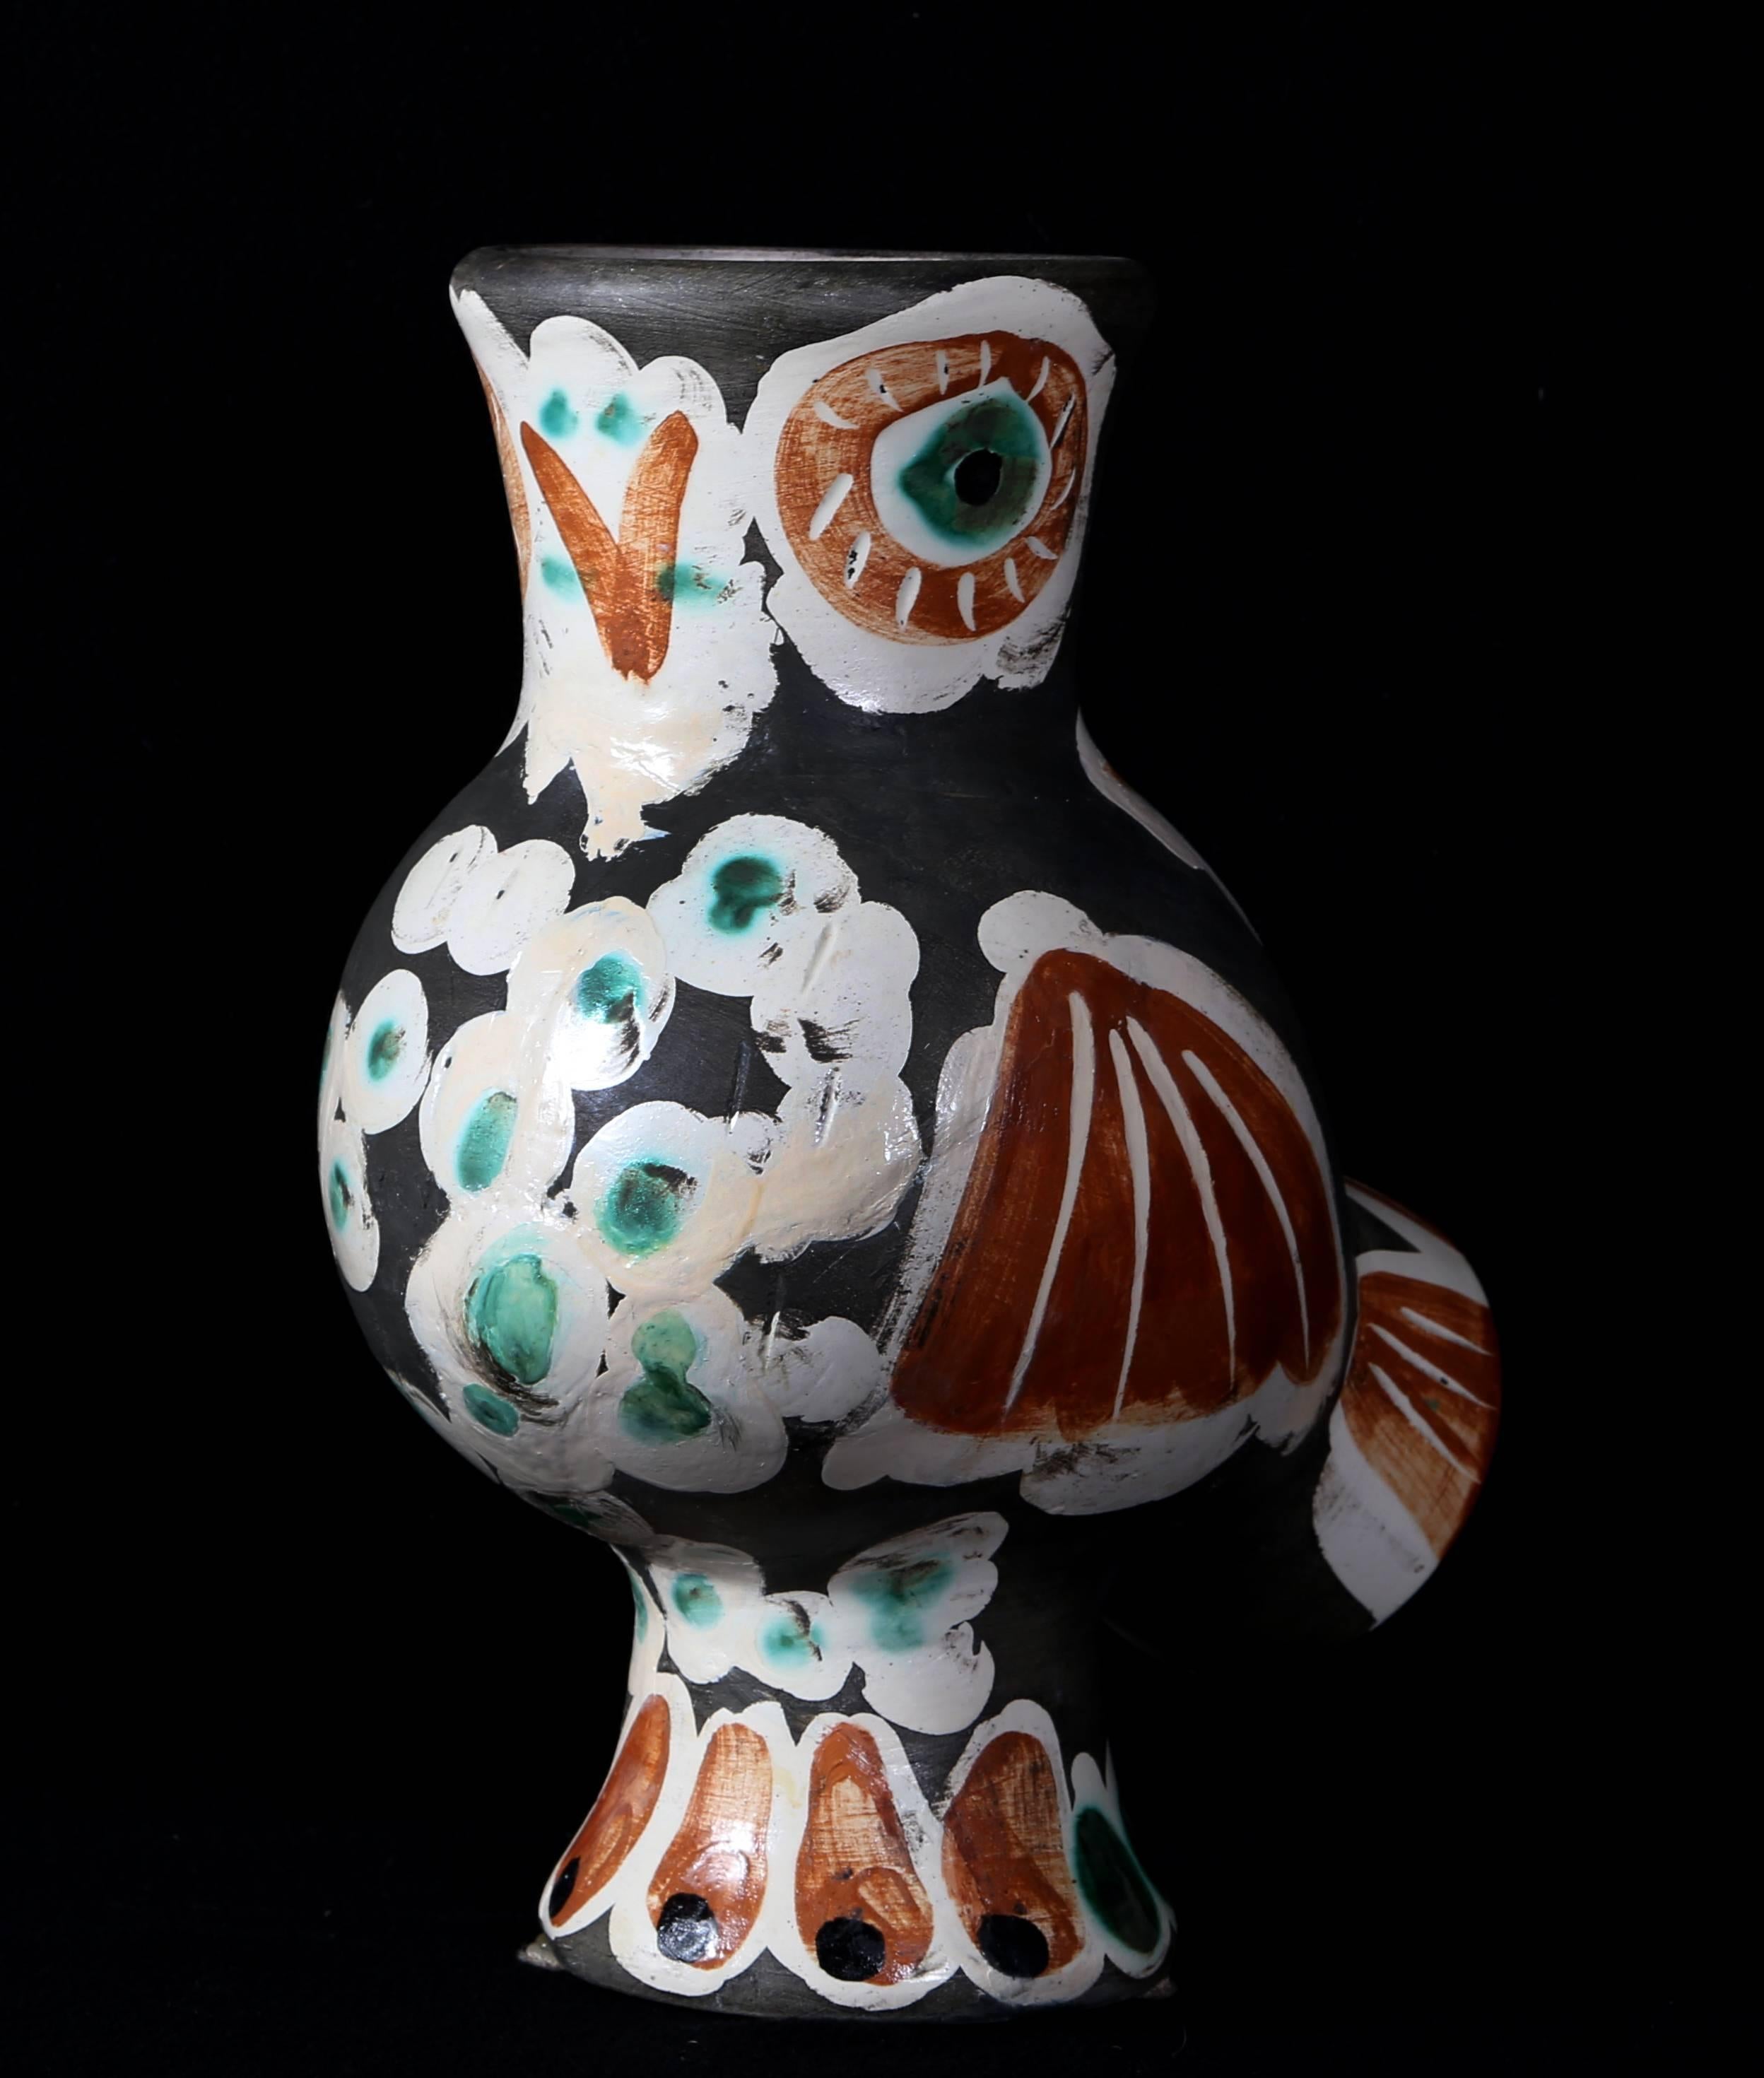 Artist: Pablo Picasso, Spanish (1881 - 1973)
Title: Wood Owl (Ramie 543)
Year: 1968
Medium: Turned Vase of A.R. White Earthenware Clay, knife engraved under partial brushed glaze, black patina
Edition: 24/500
Size: 11 x 8 x 6 in. (27.94 x 20.32 x